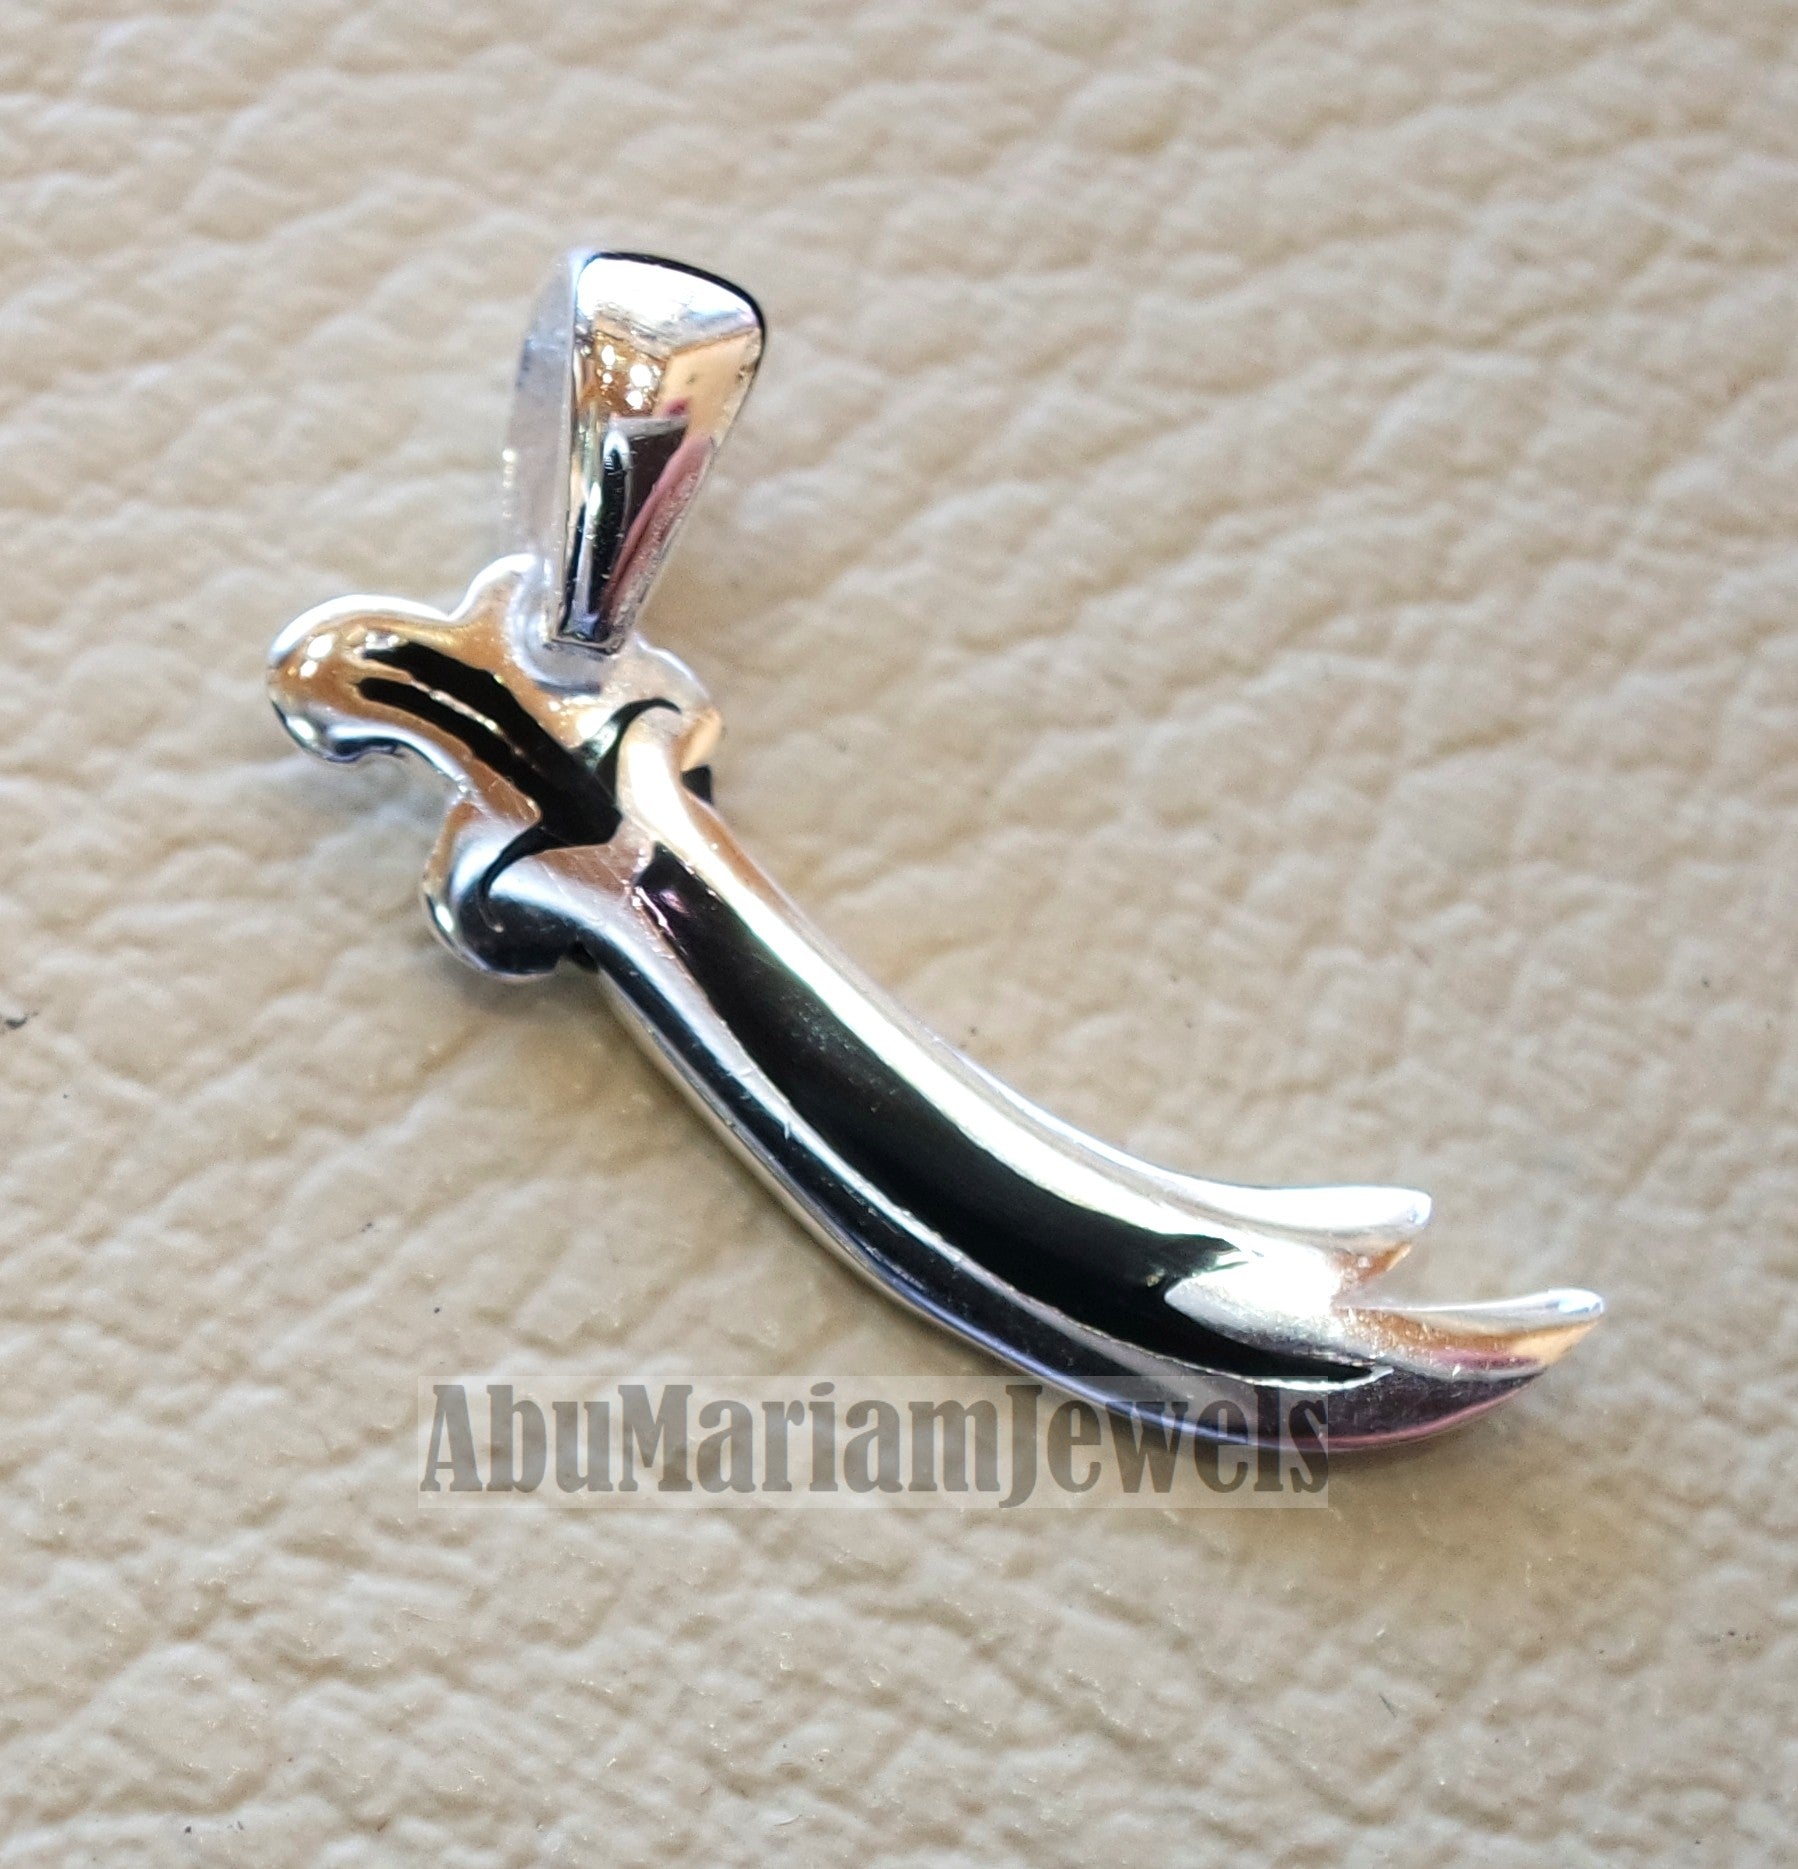 sword pendant small size sterling silver 925 and black enamel handmade Zo Alfaqar Saif express fast shipping with gift jewelry box